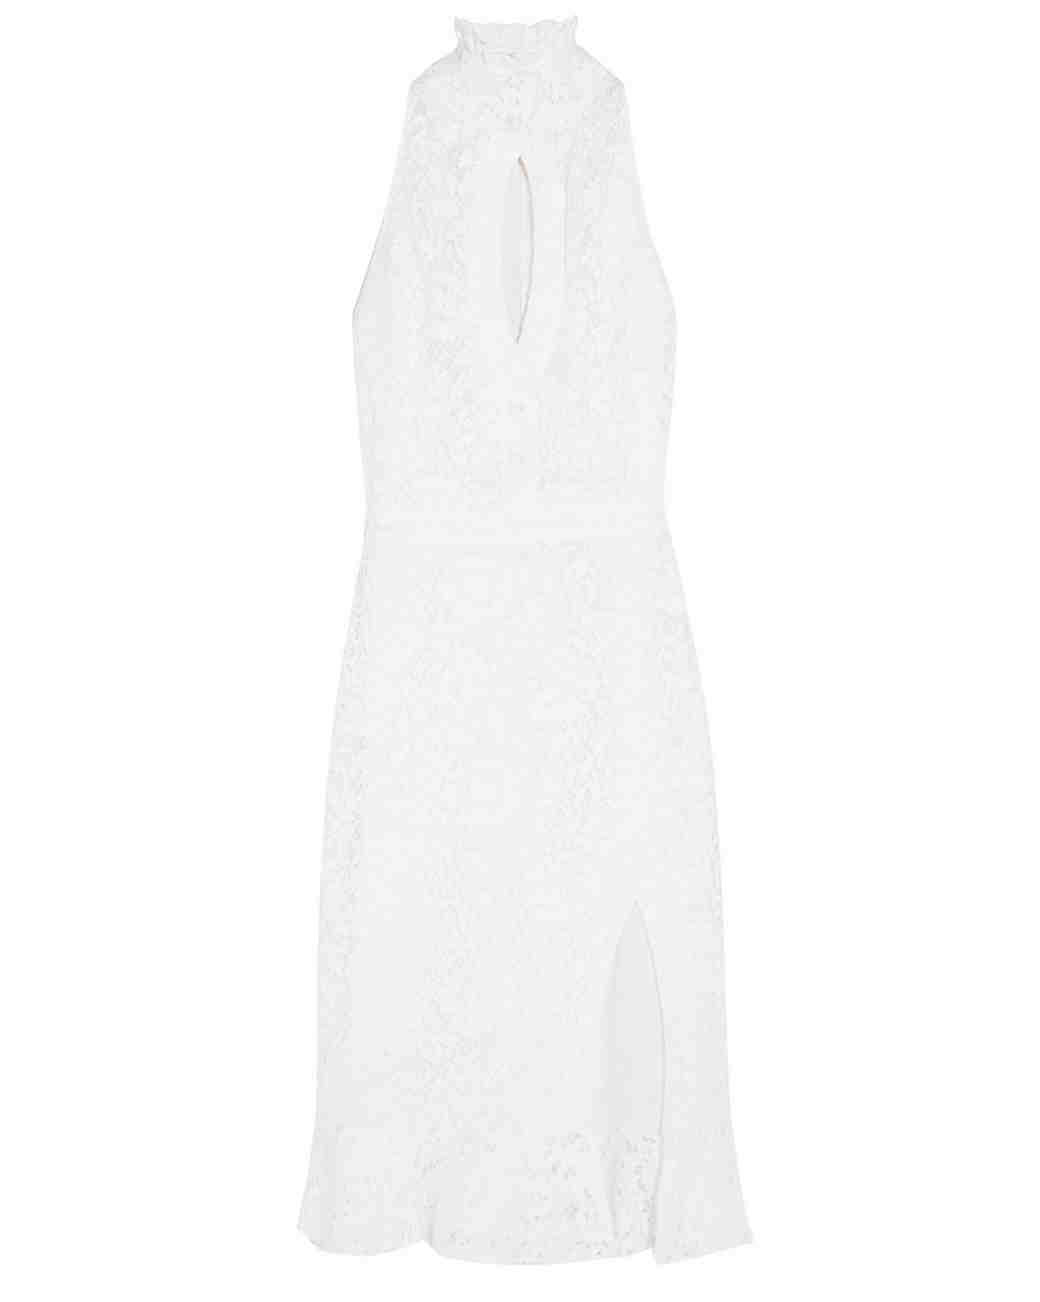 10 Chic Little White Dresses for Brides That You Can Buy Right Now ...